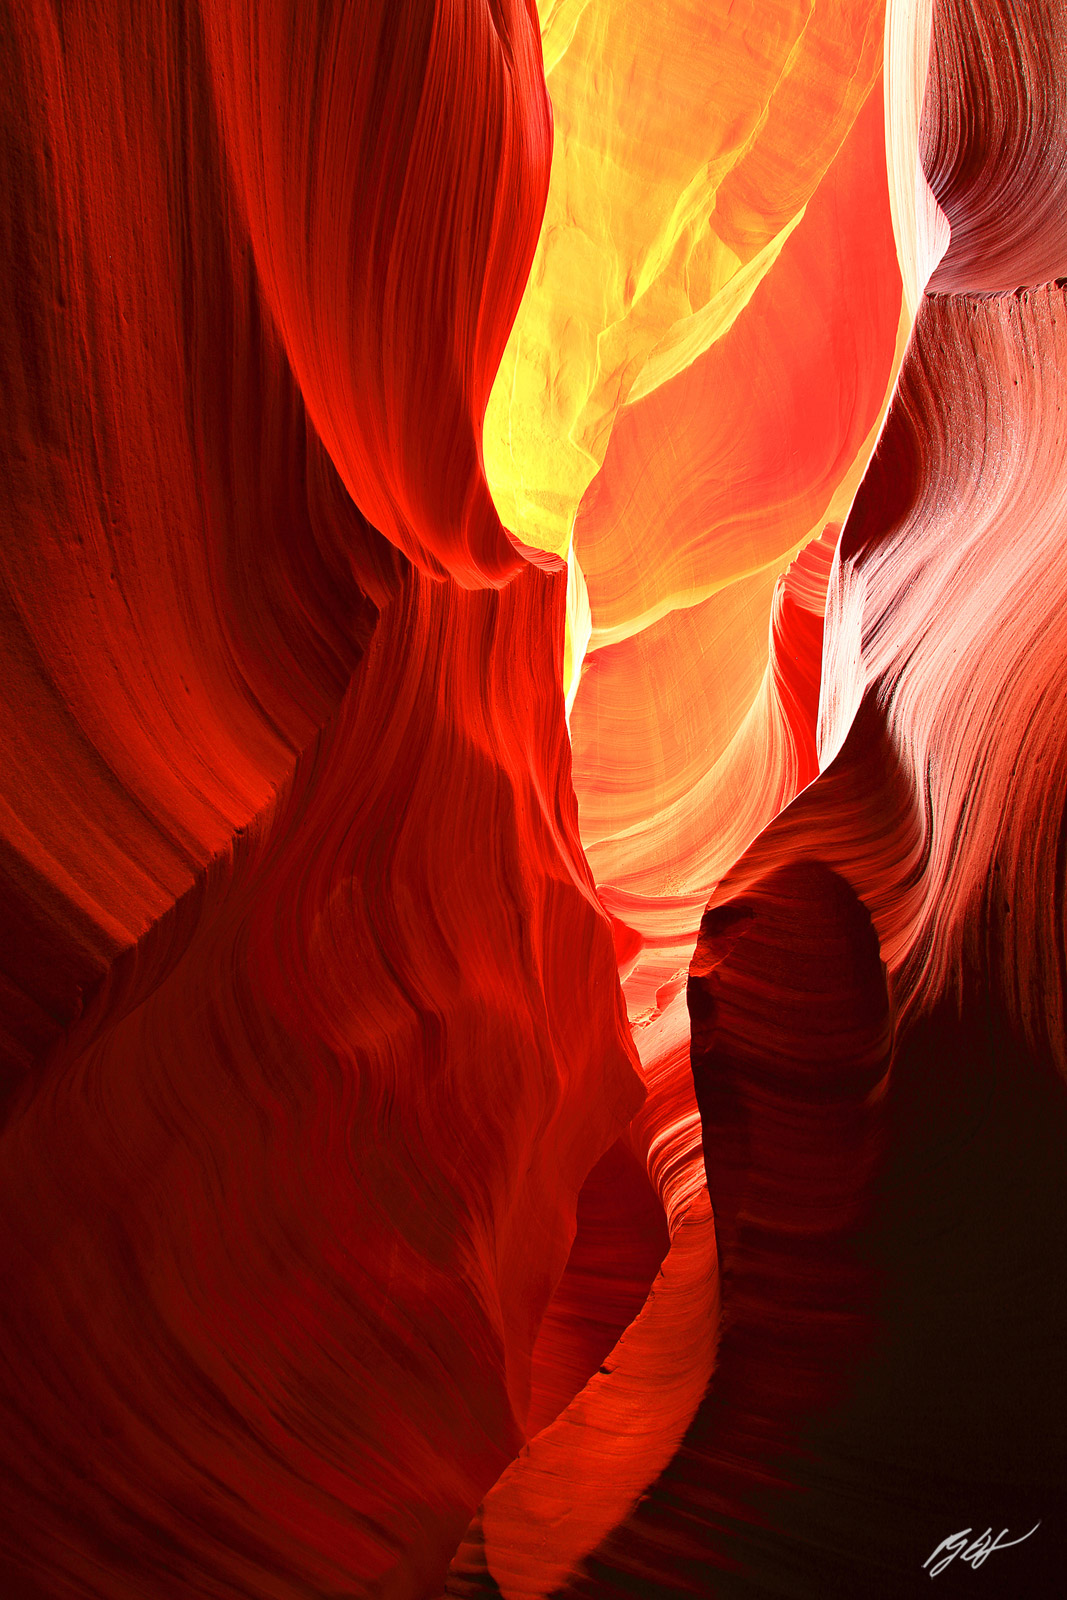 Colors of Reflected Light in Lower Antelope Canyon in Arizona